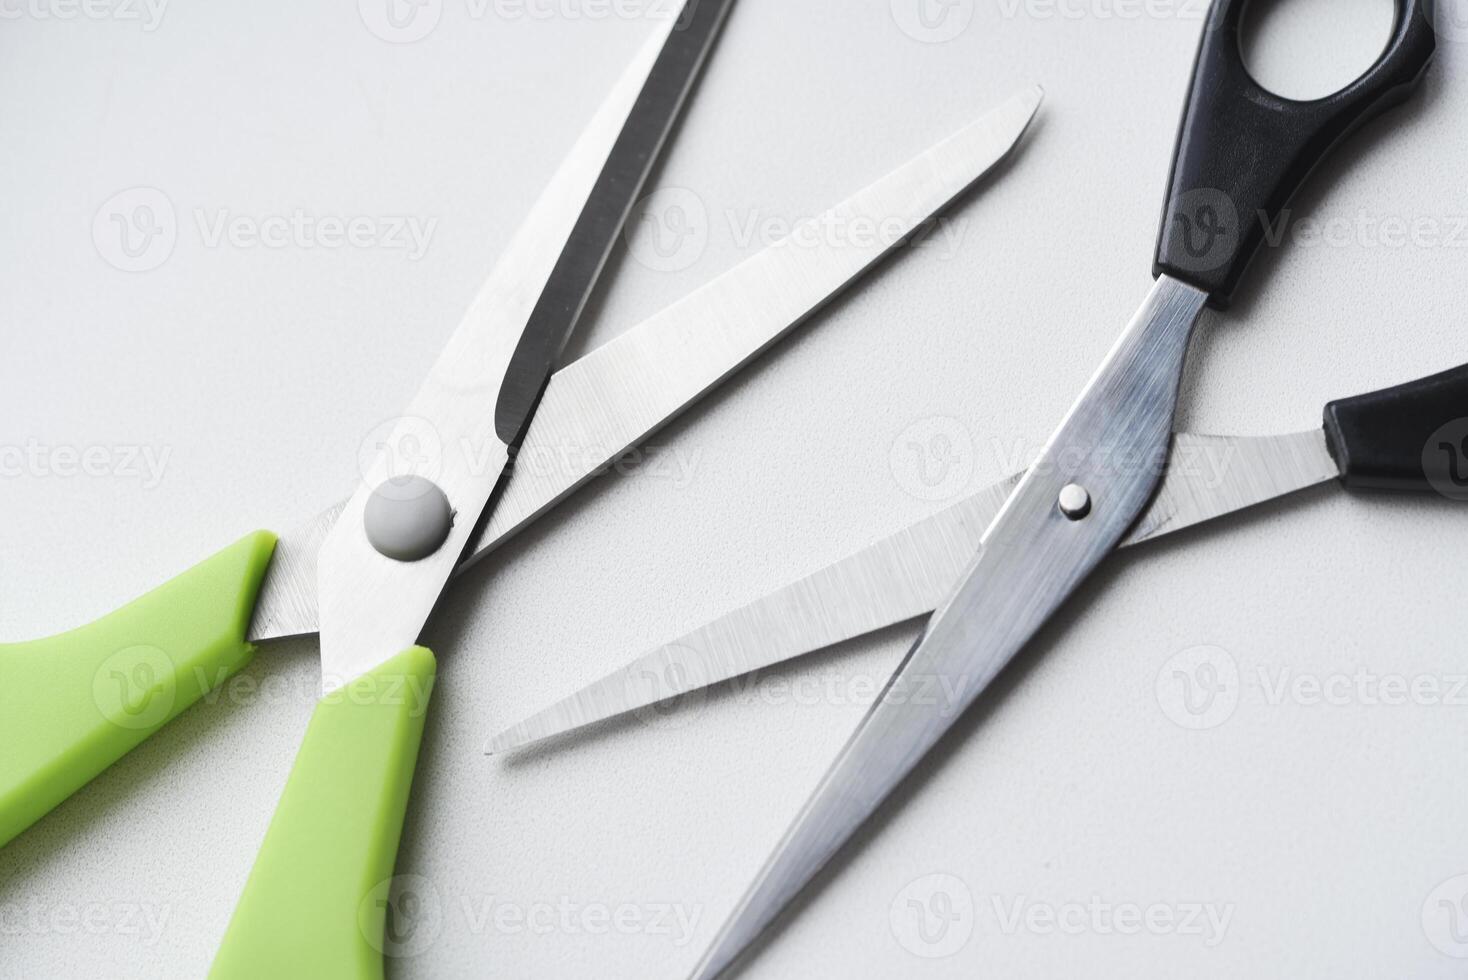 Sewing scissors on a white background. Green scissors. photo